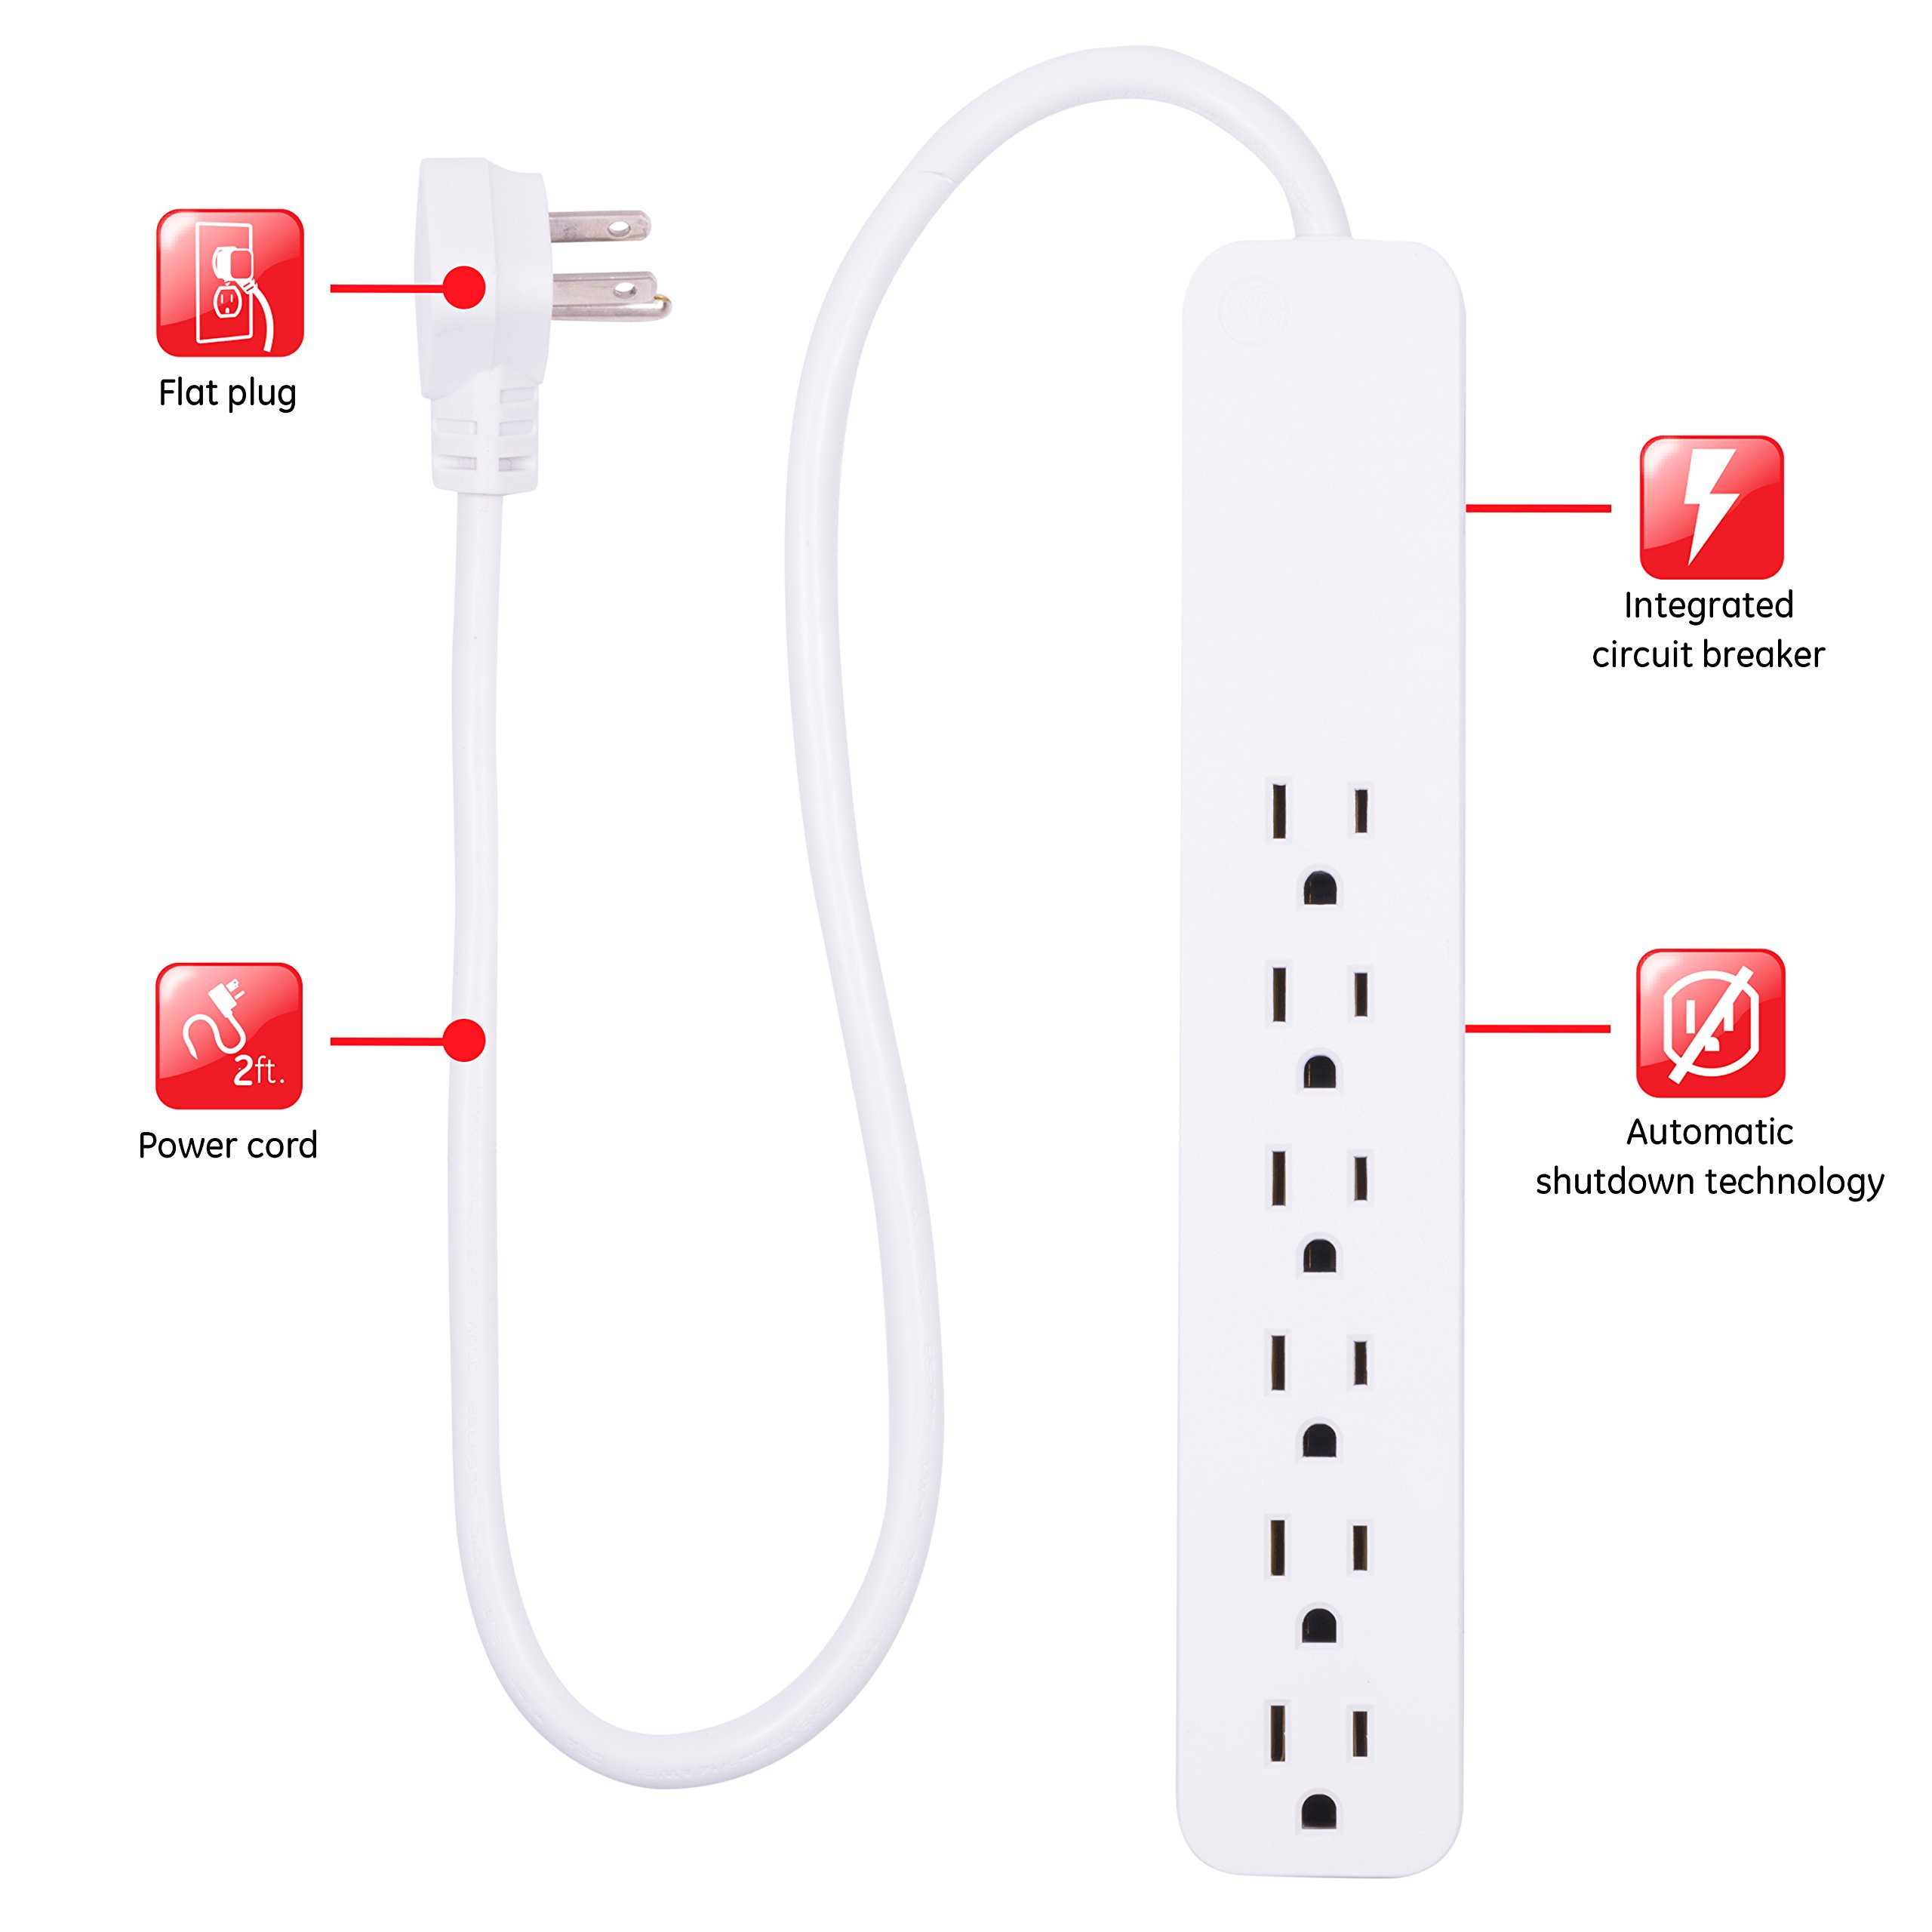 GE Pro 6-Outlet Surge Protector 2 Pack, 2 Ft Extension Cord, White, 46867 & 6-Outlet Surge Protector, 4 Ft Extension Cord, Power Strip, 800 Joules, Flat Plug, Twist-to-Close Safety Covers, White